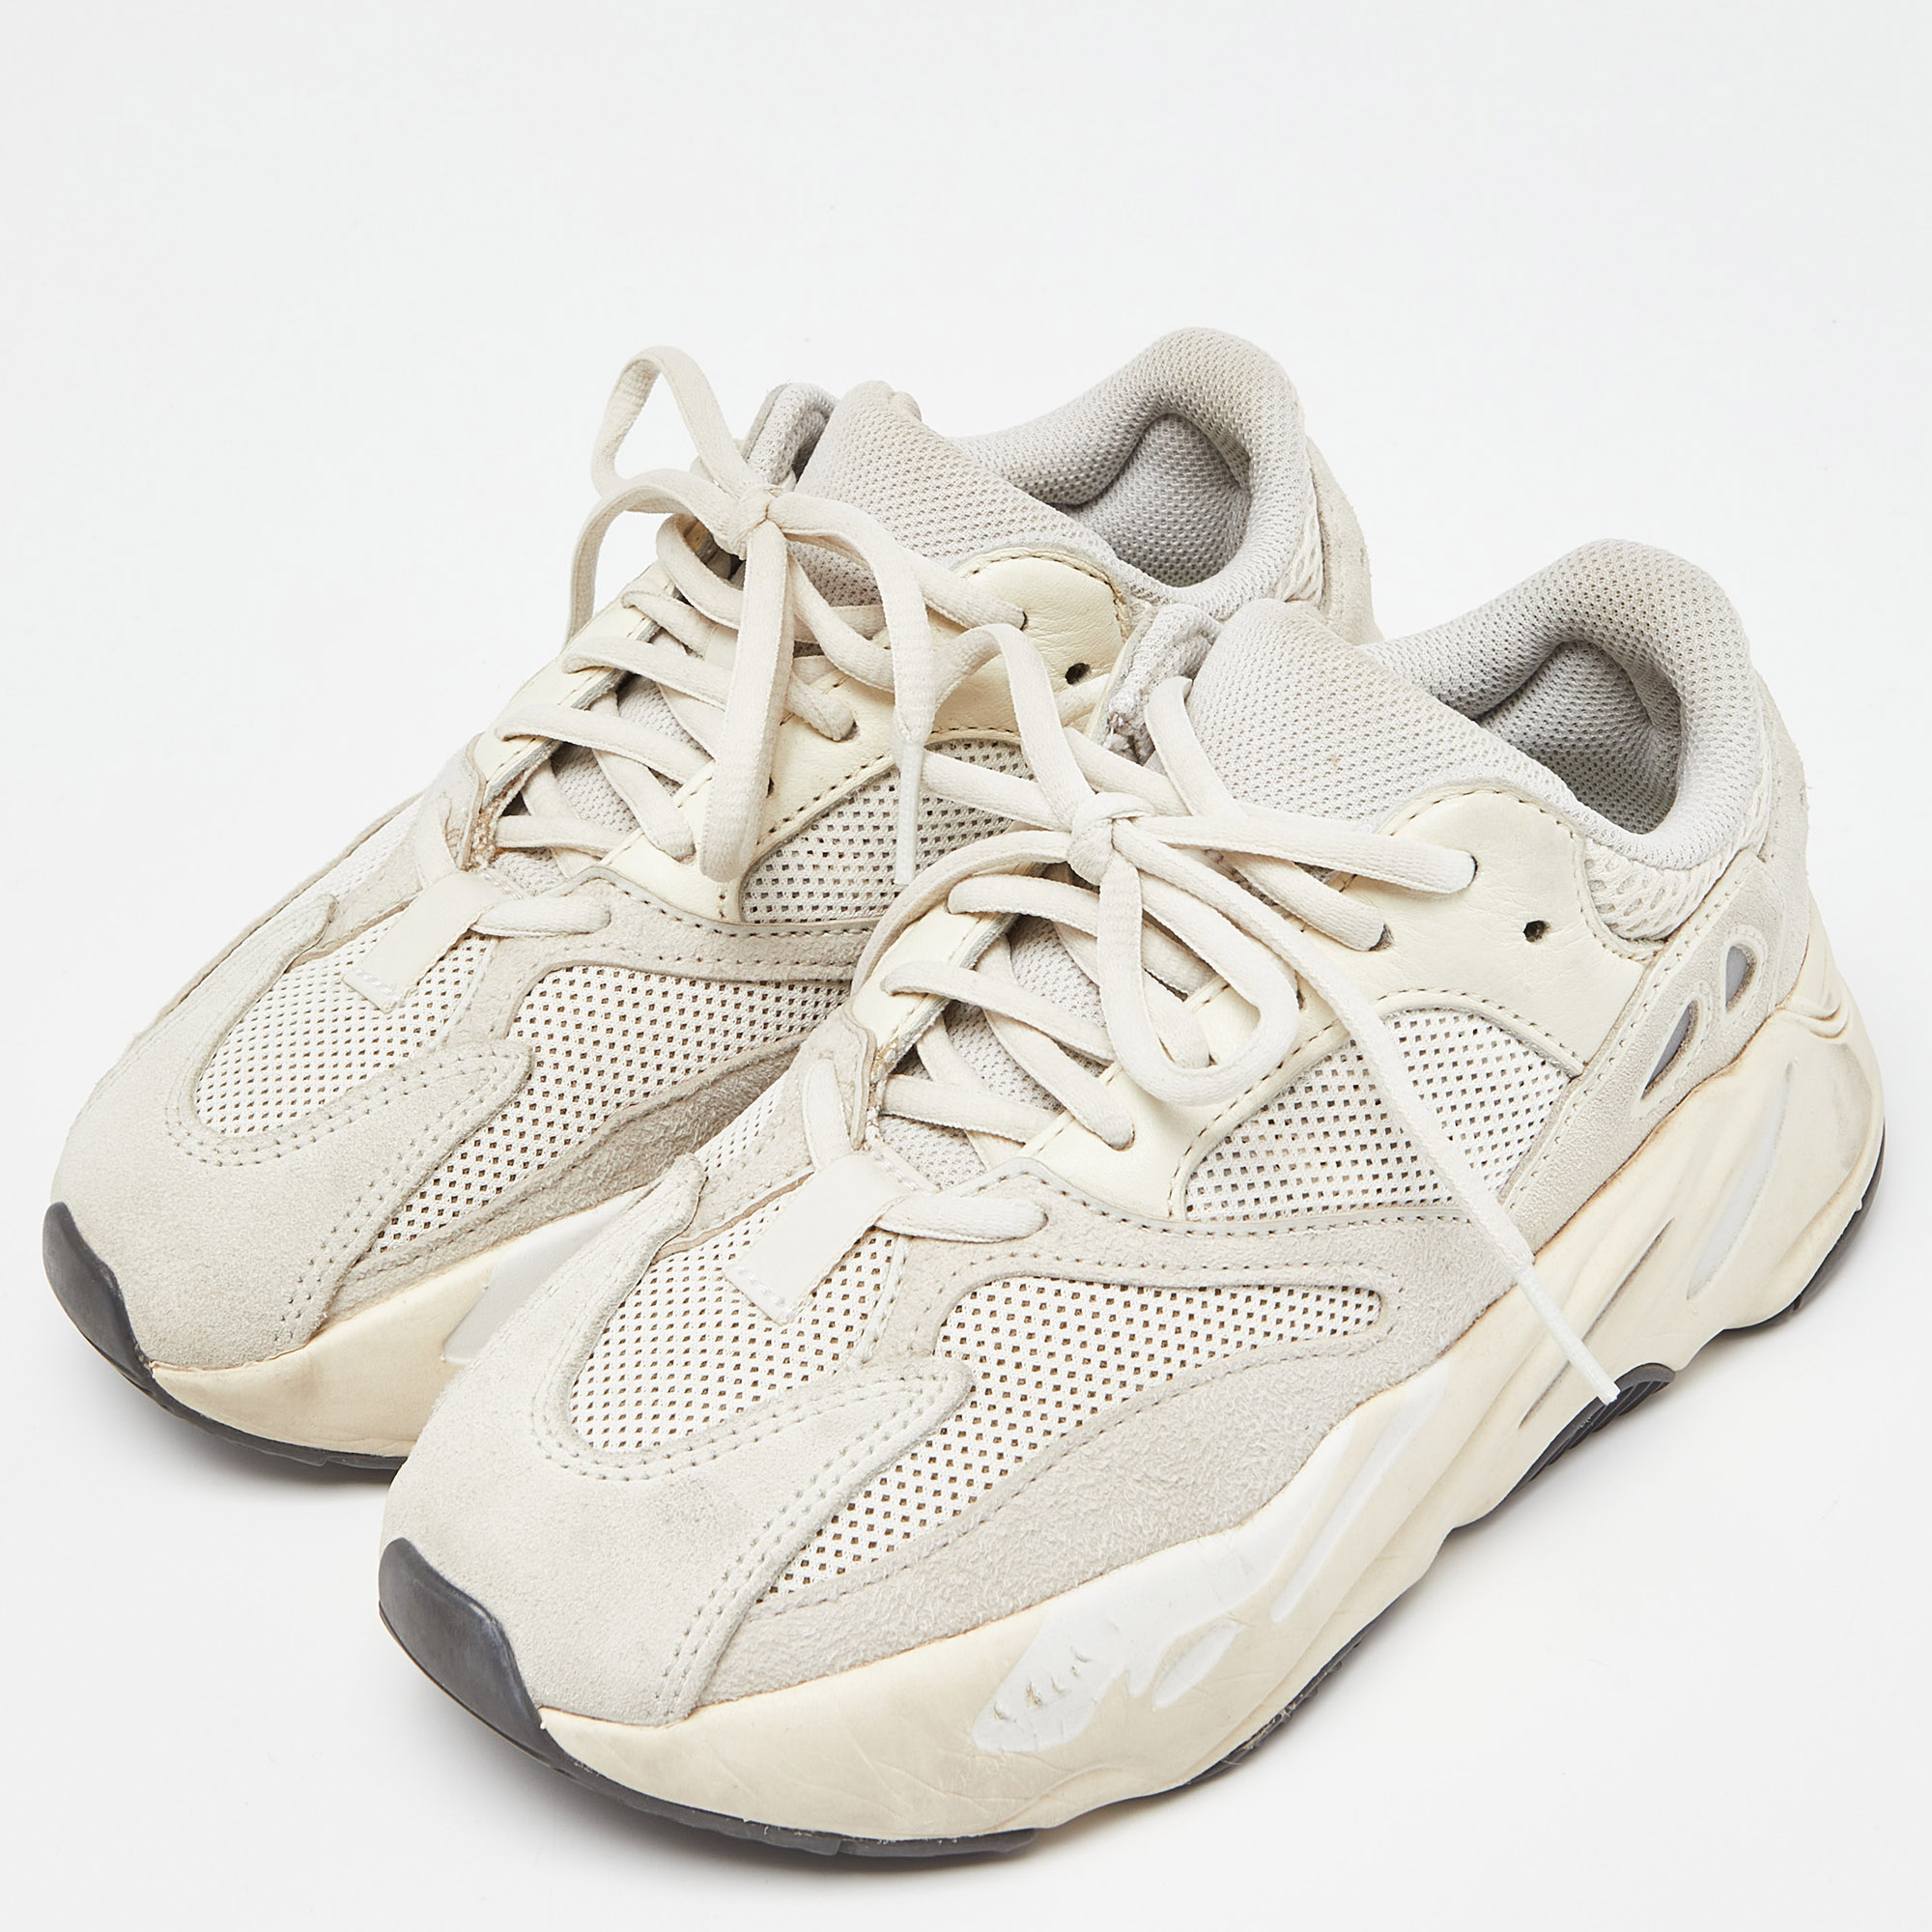 

Yeezy x Adidas Cream Suede and Mesh Boost 700 Analog Sneakers Size